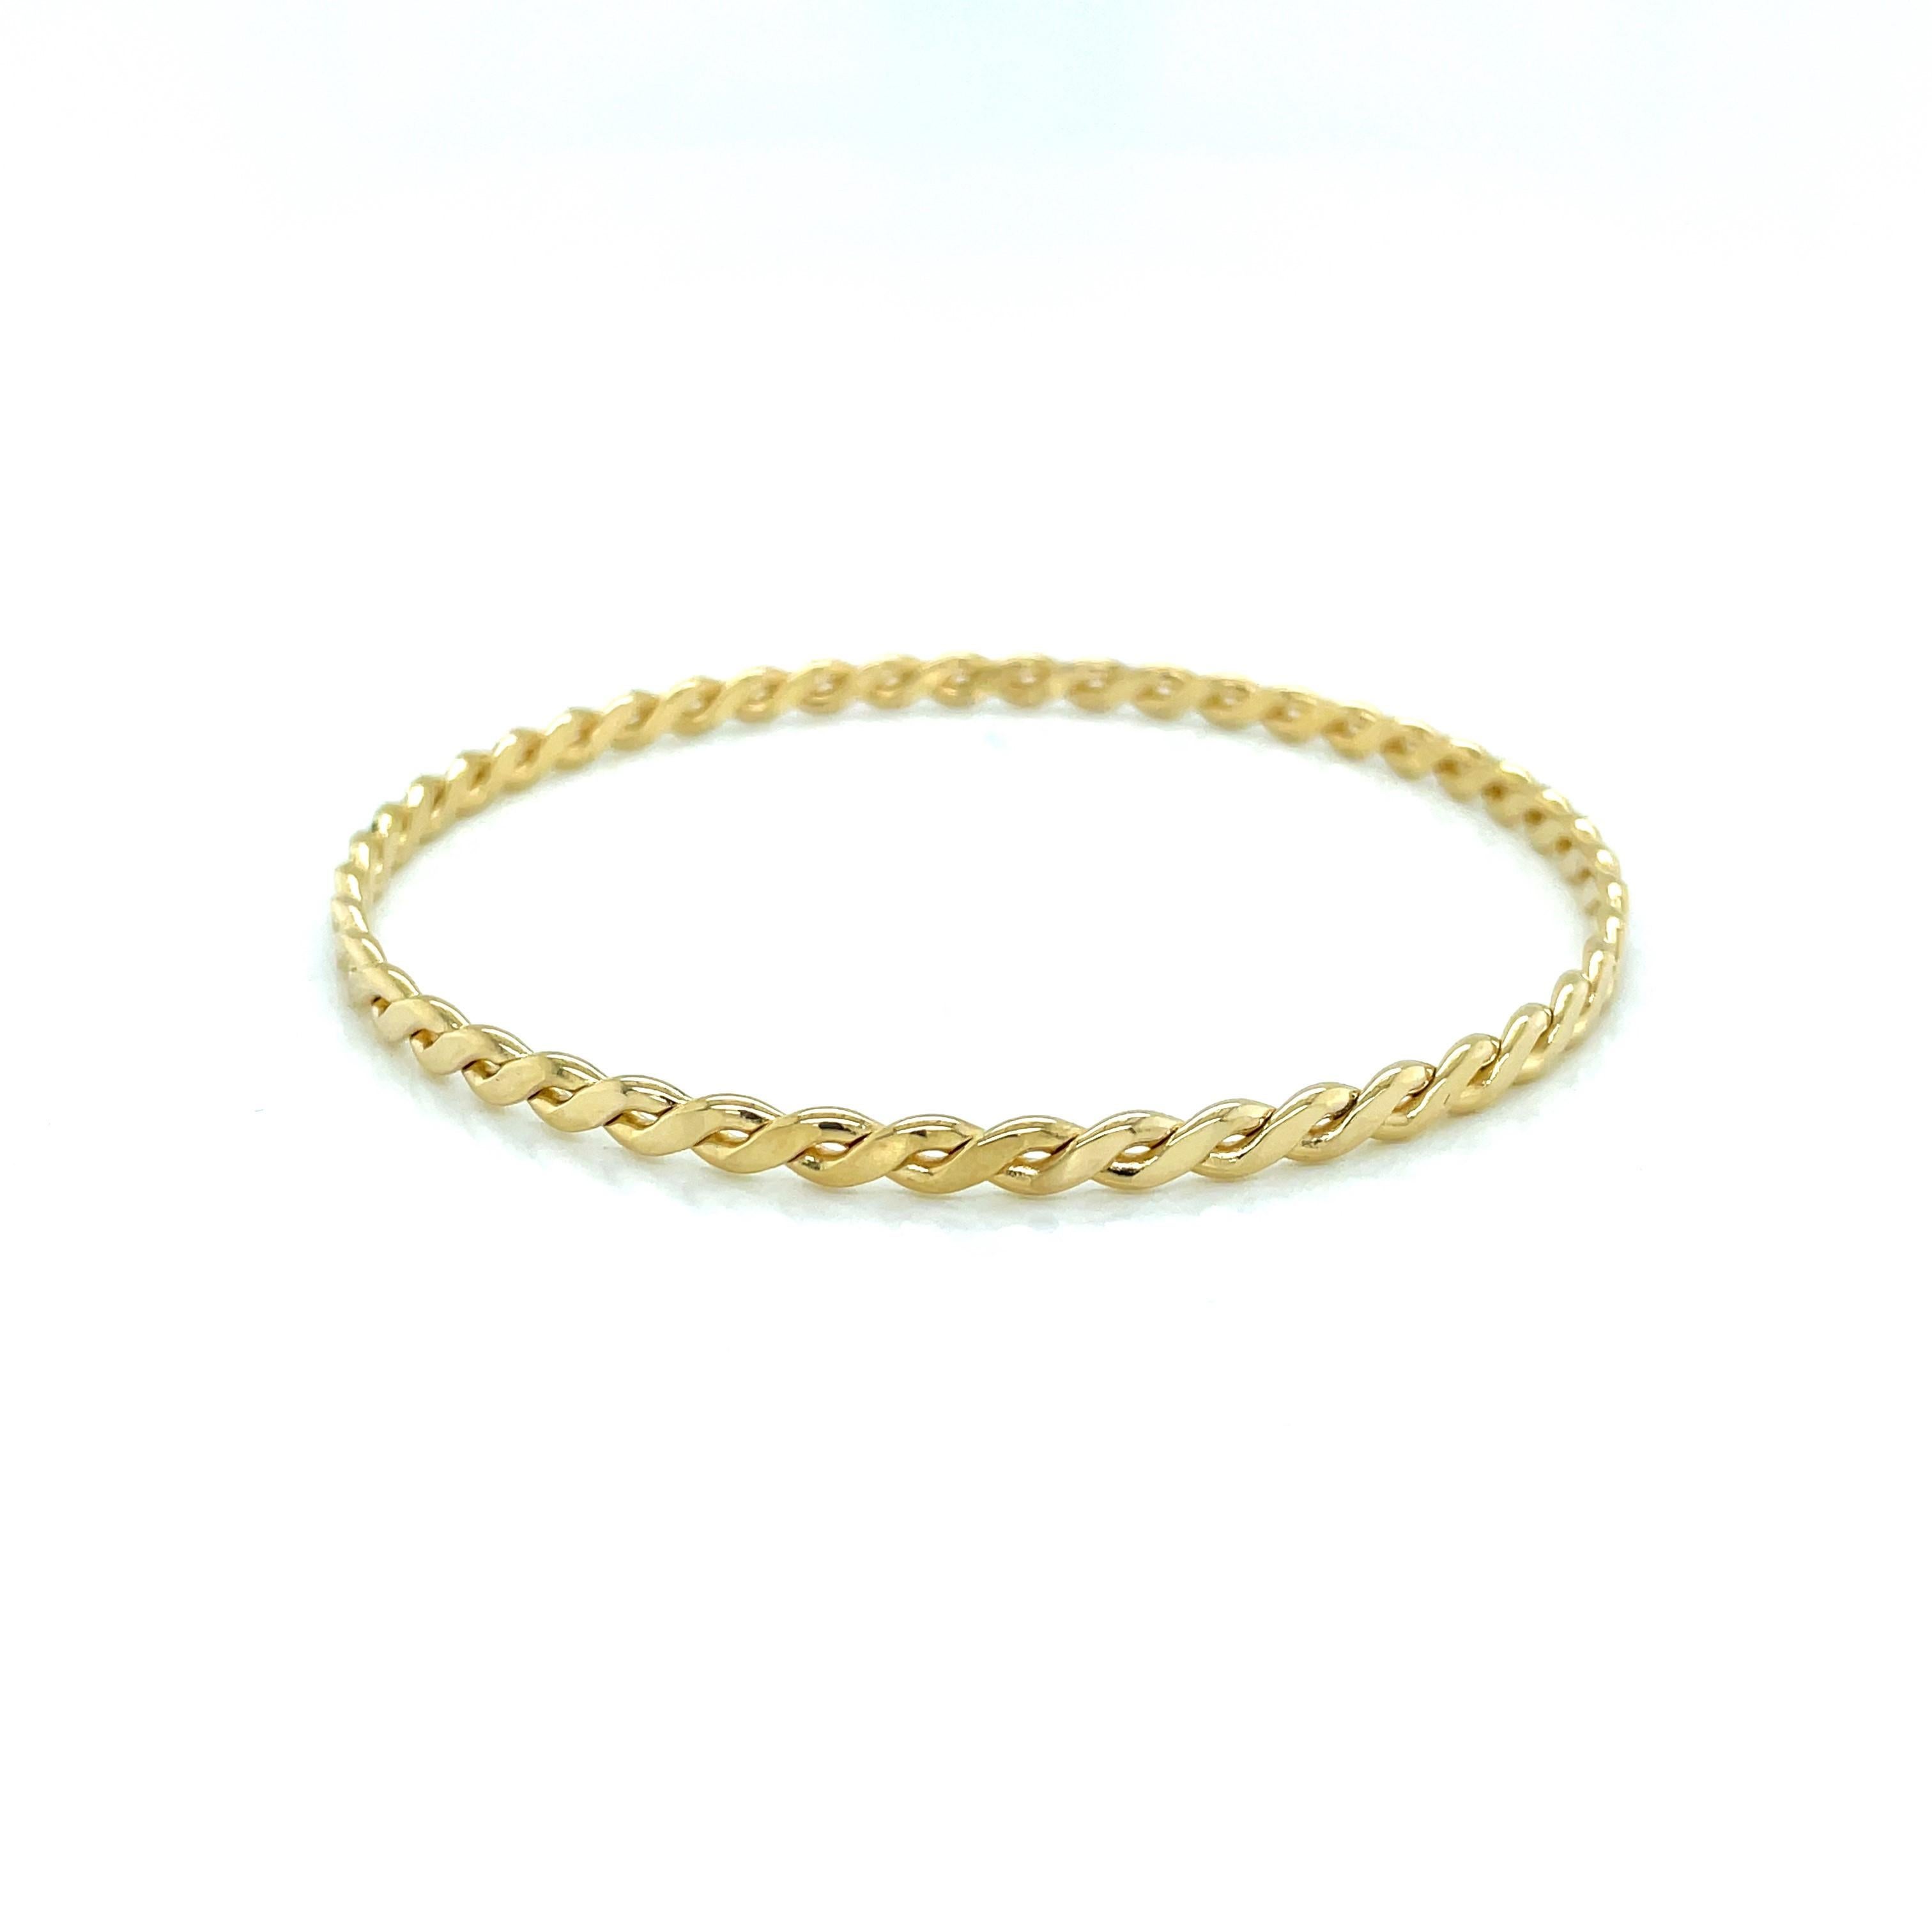 Slip on this classic bangle as the perfect accessory to compliment to your every day. In 14 karat yellow gold,  the braided rope twist design creates interest and youthful appeal.  Measures 2-5/8 inch with a 8 inch circumference (to determine the